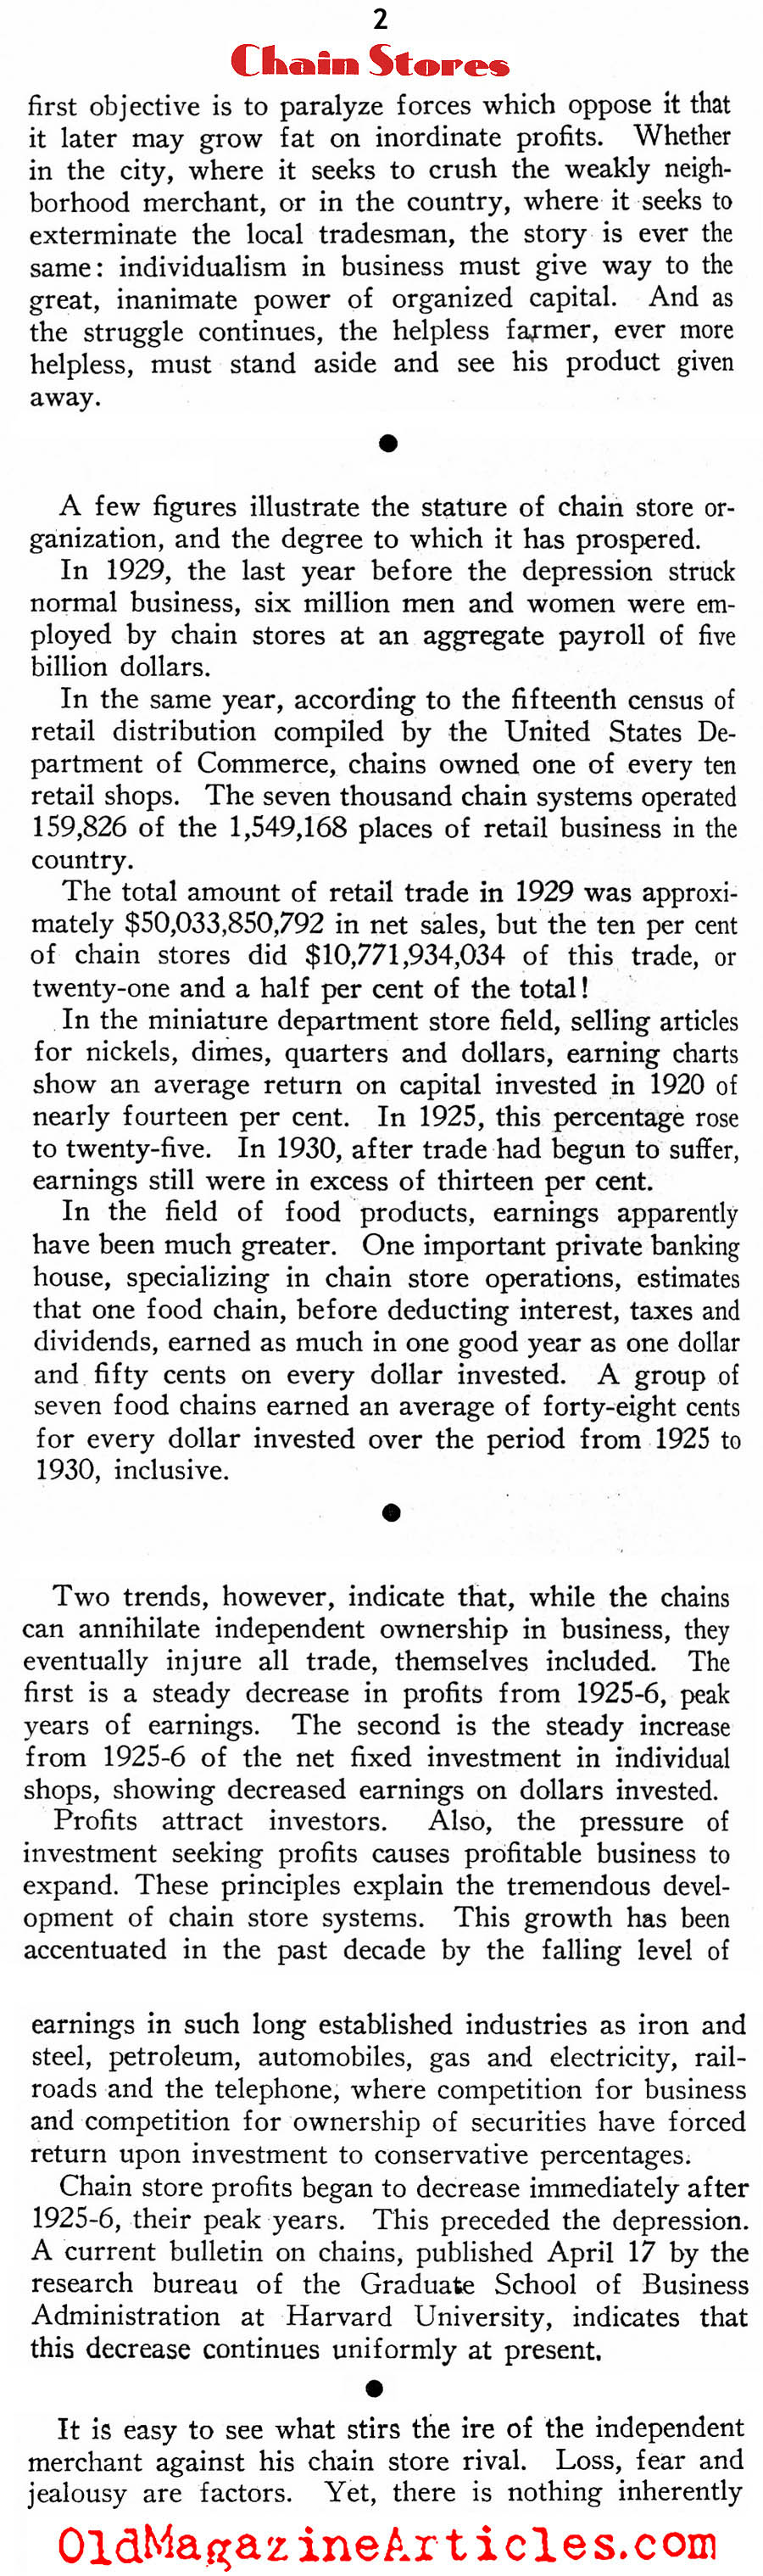 The Chain Store Problem (New Outlook Magazine, 1933)